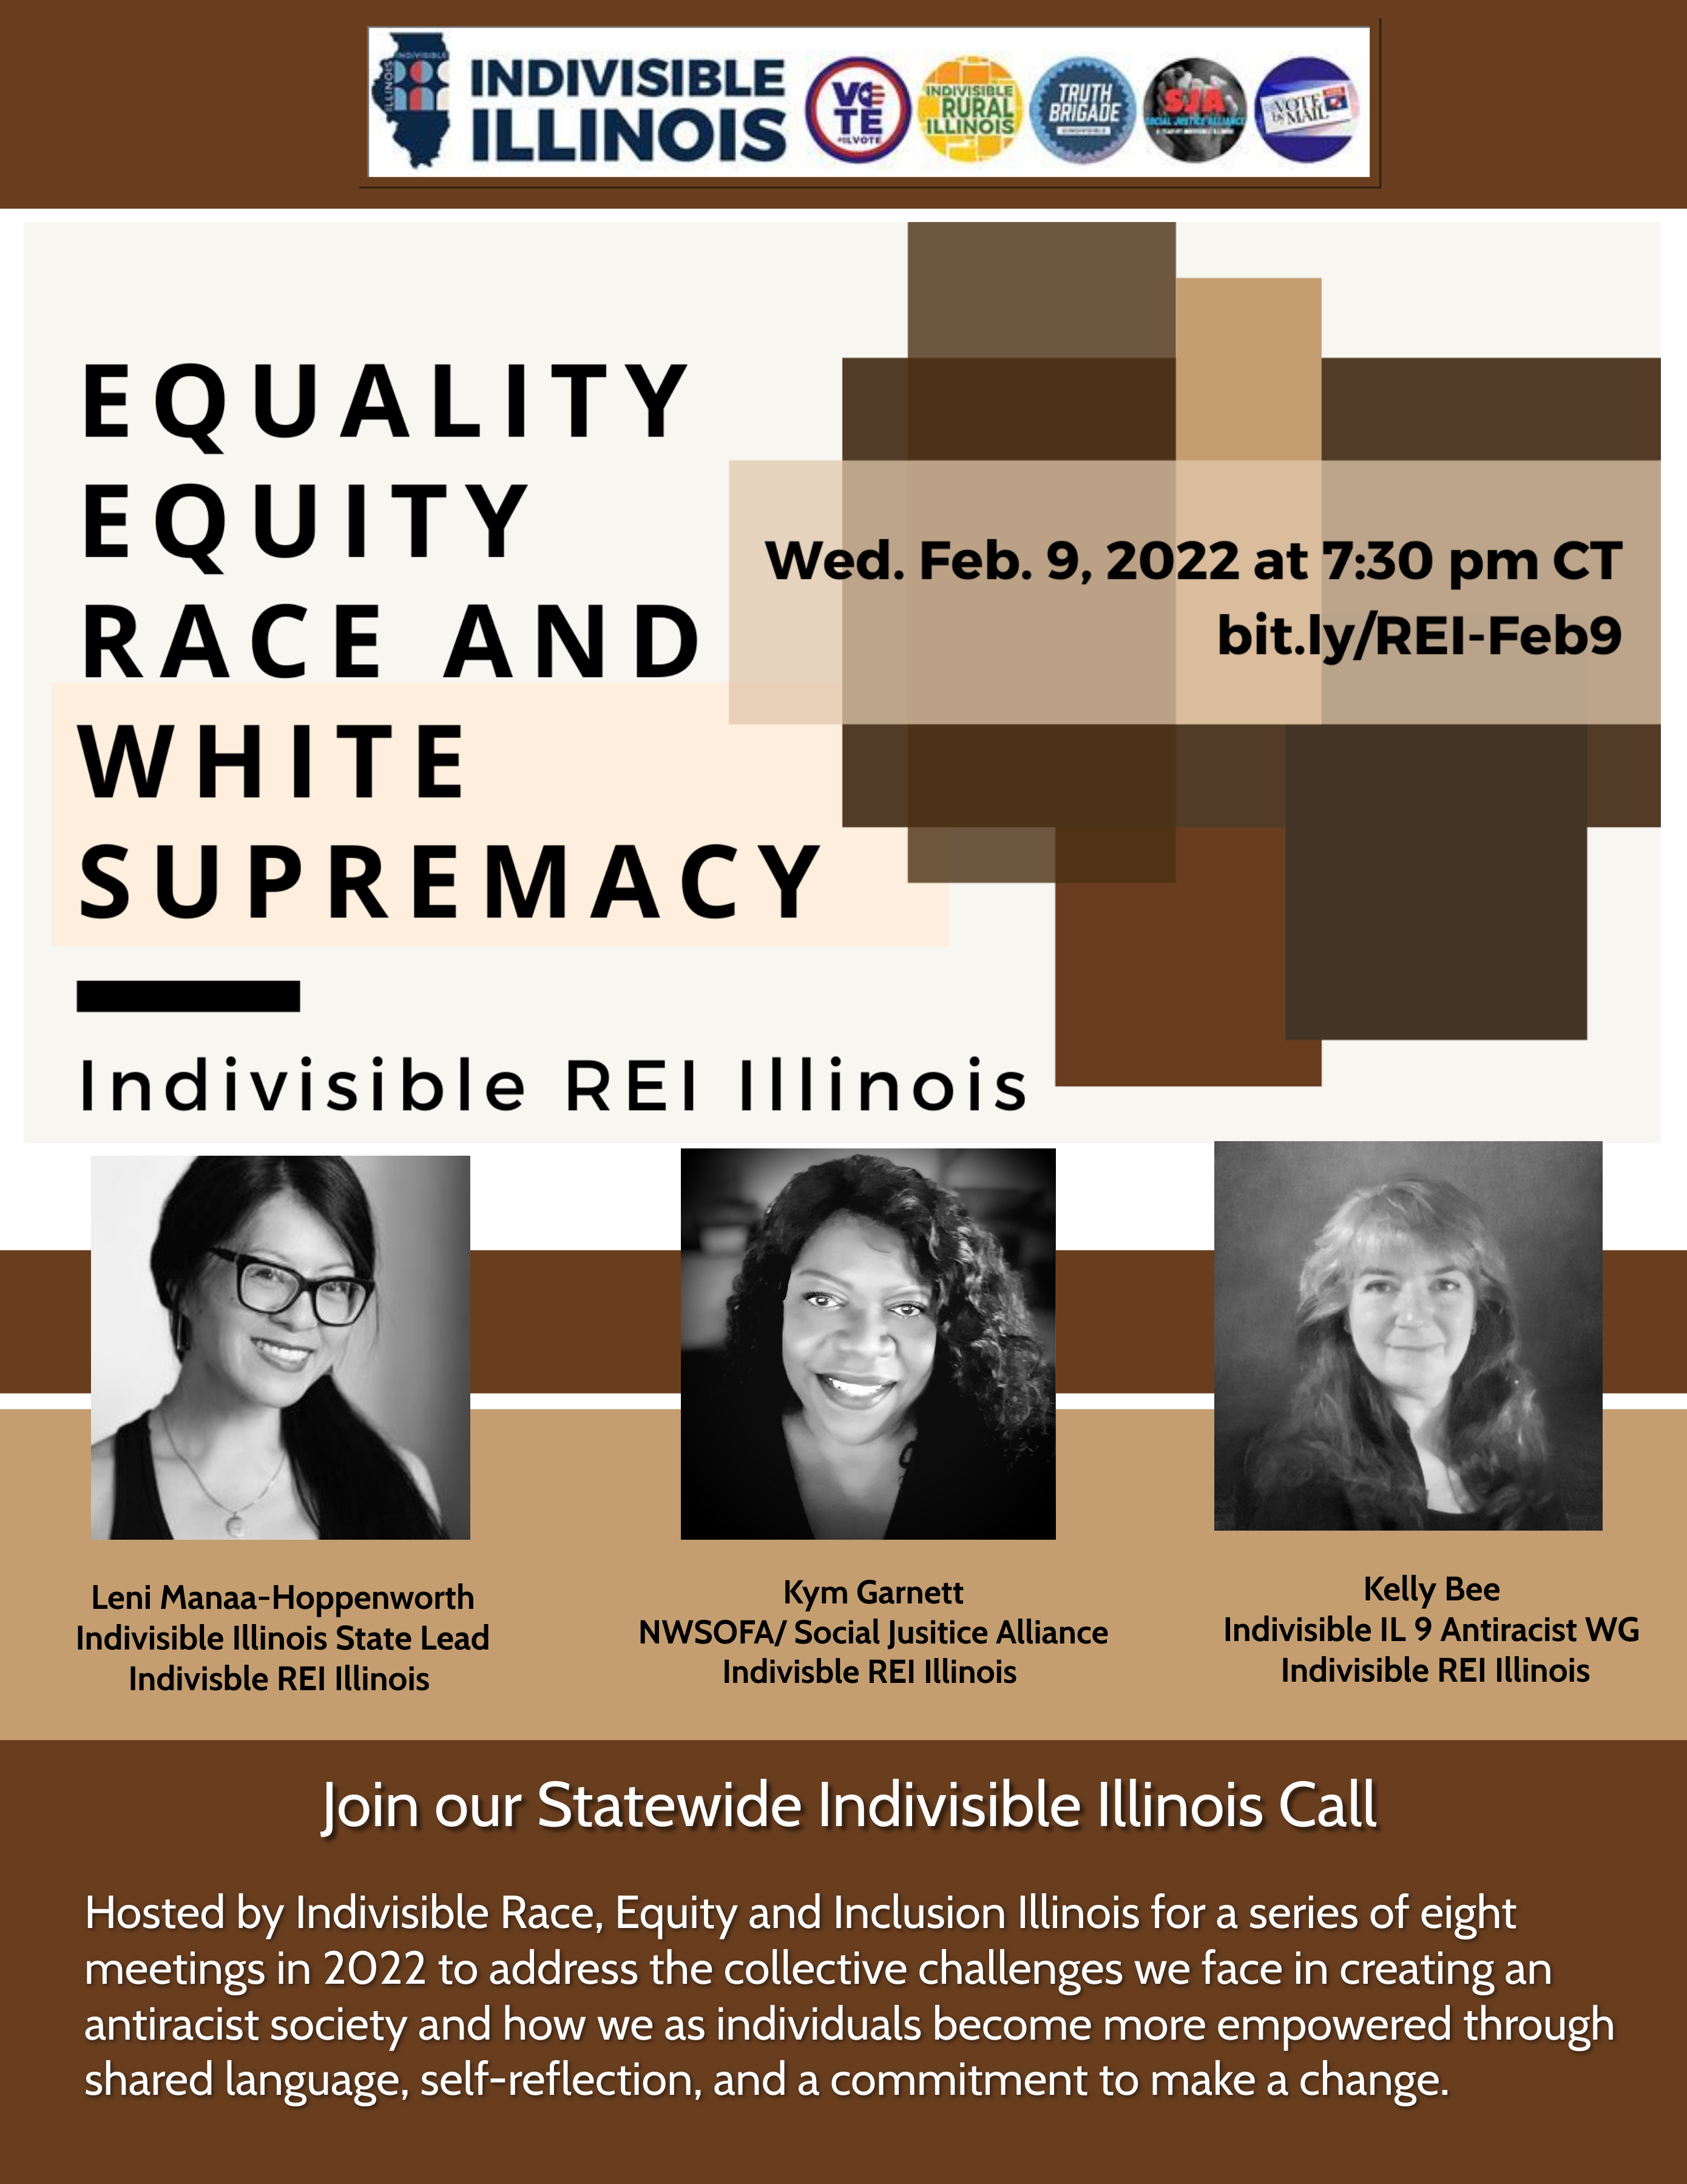 Justin Marcoviche-Garnett of the Reparations Stakeholders Authority of Evanston and Kelly Bee of Indivisible IL 9 Antiracist Work Group and Indivisible REI Illinois